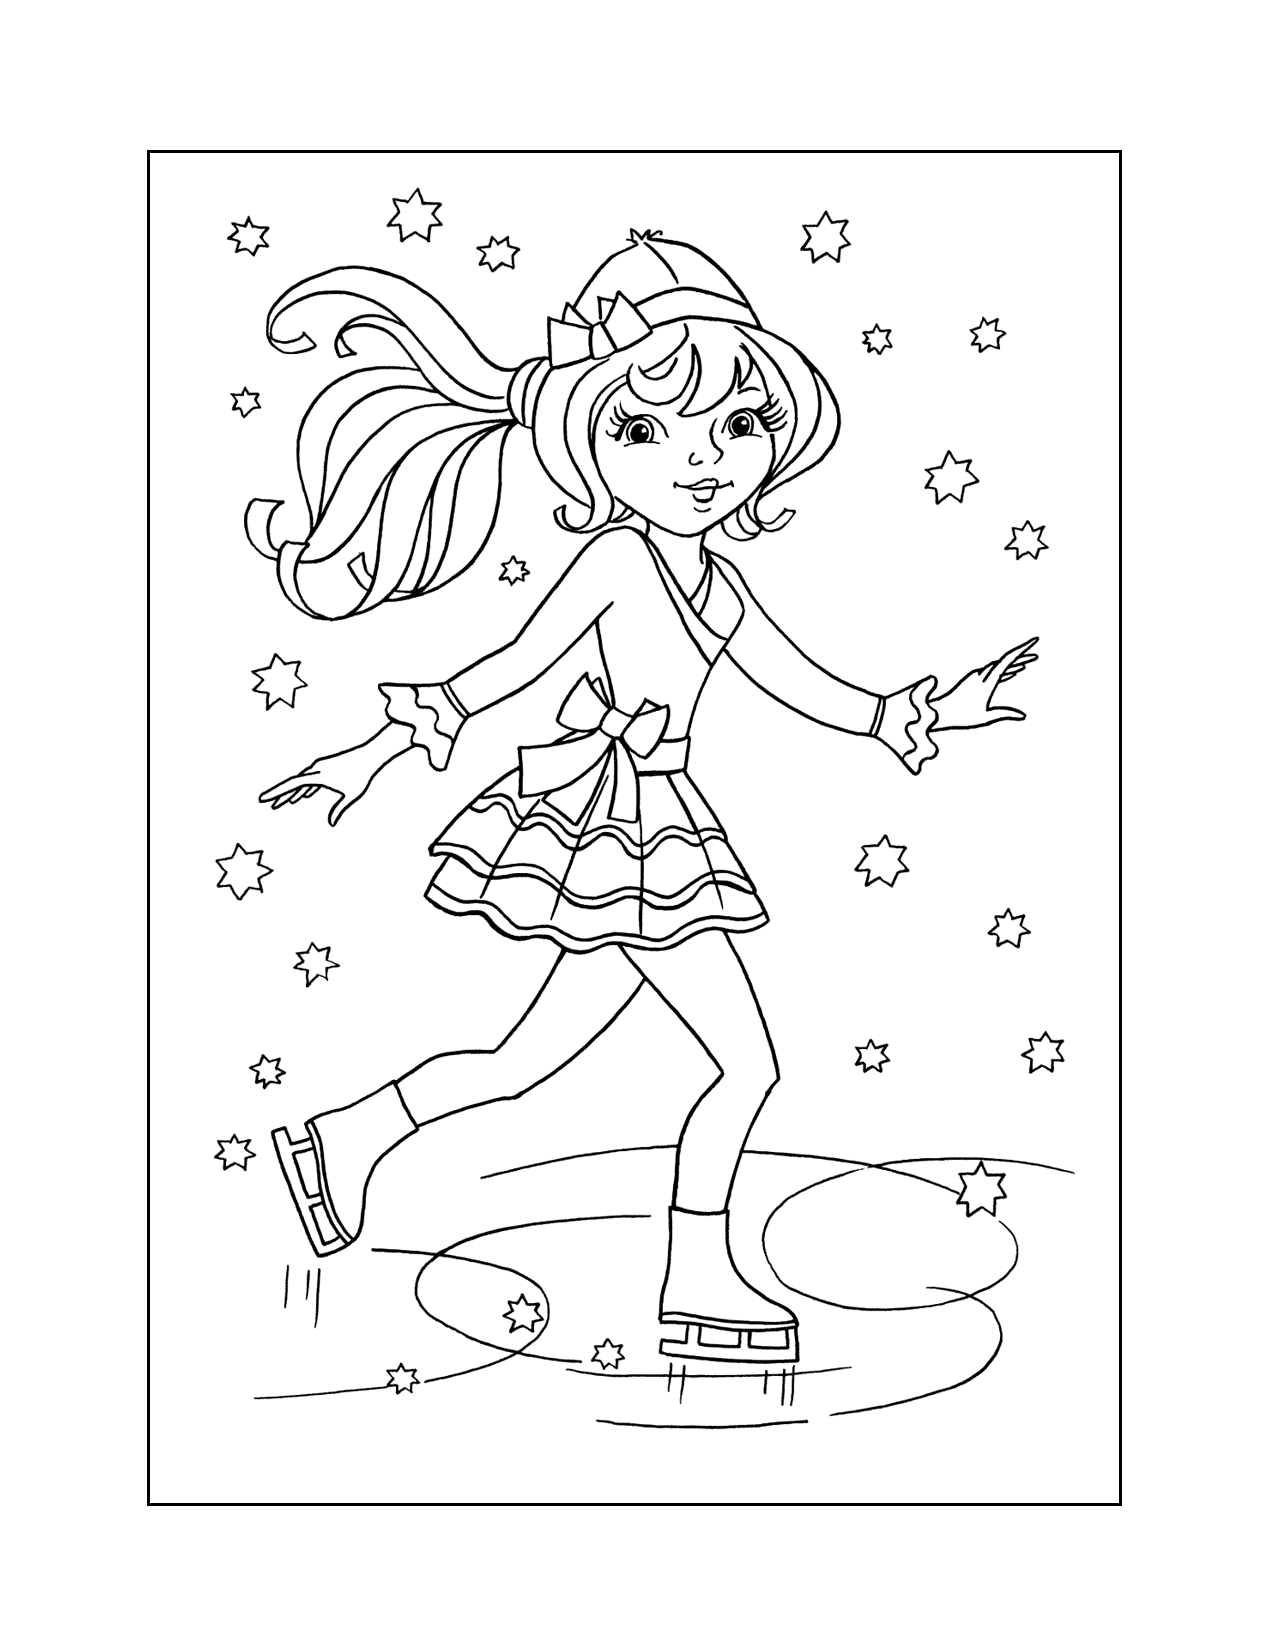 Cartoon Figure Skater Coloring Page